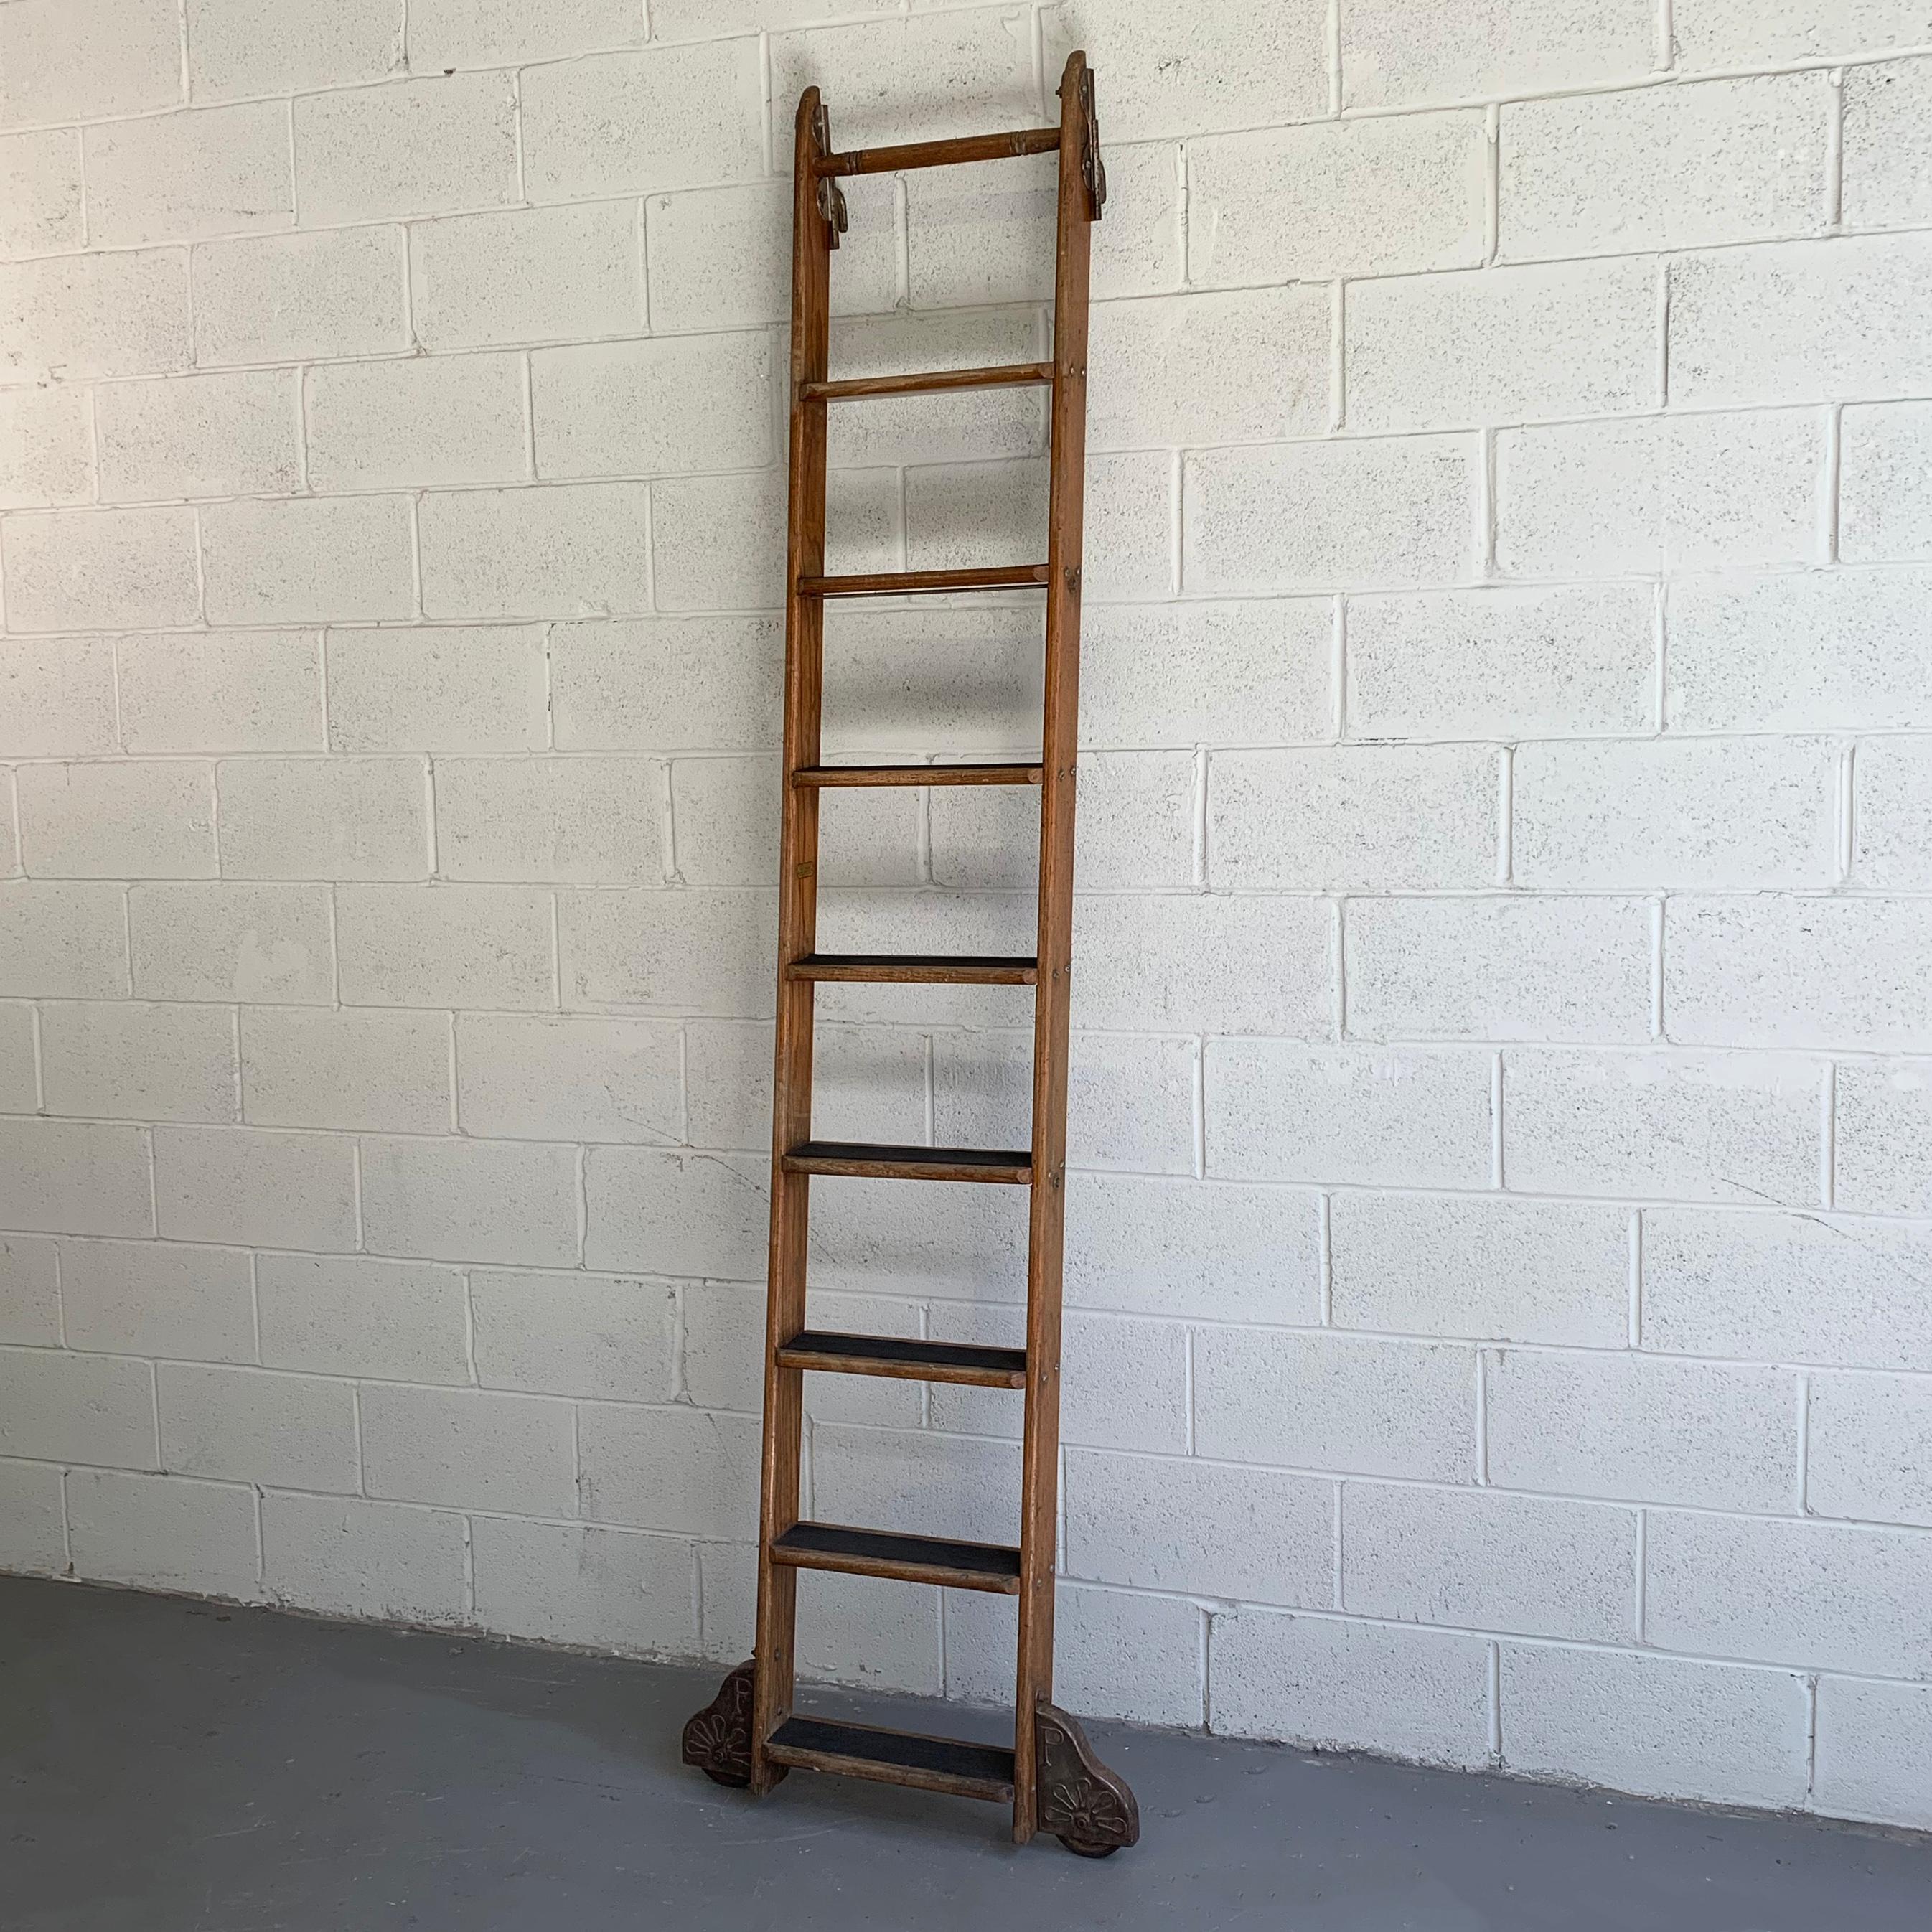 Industrial, rolling, oak library ladder by Putnam features decorative steel hardware, hooks at the top and lateral wheels at the bottom that measure 27 inches wide.